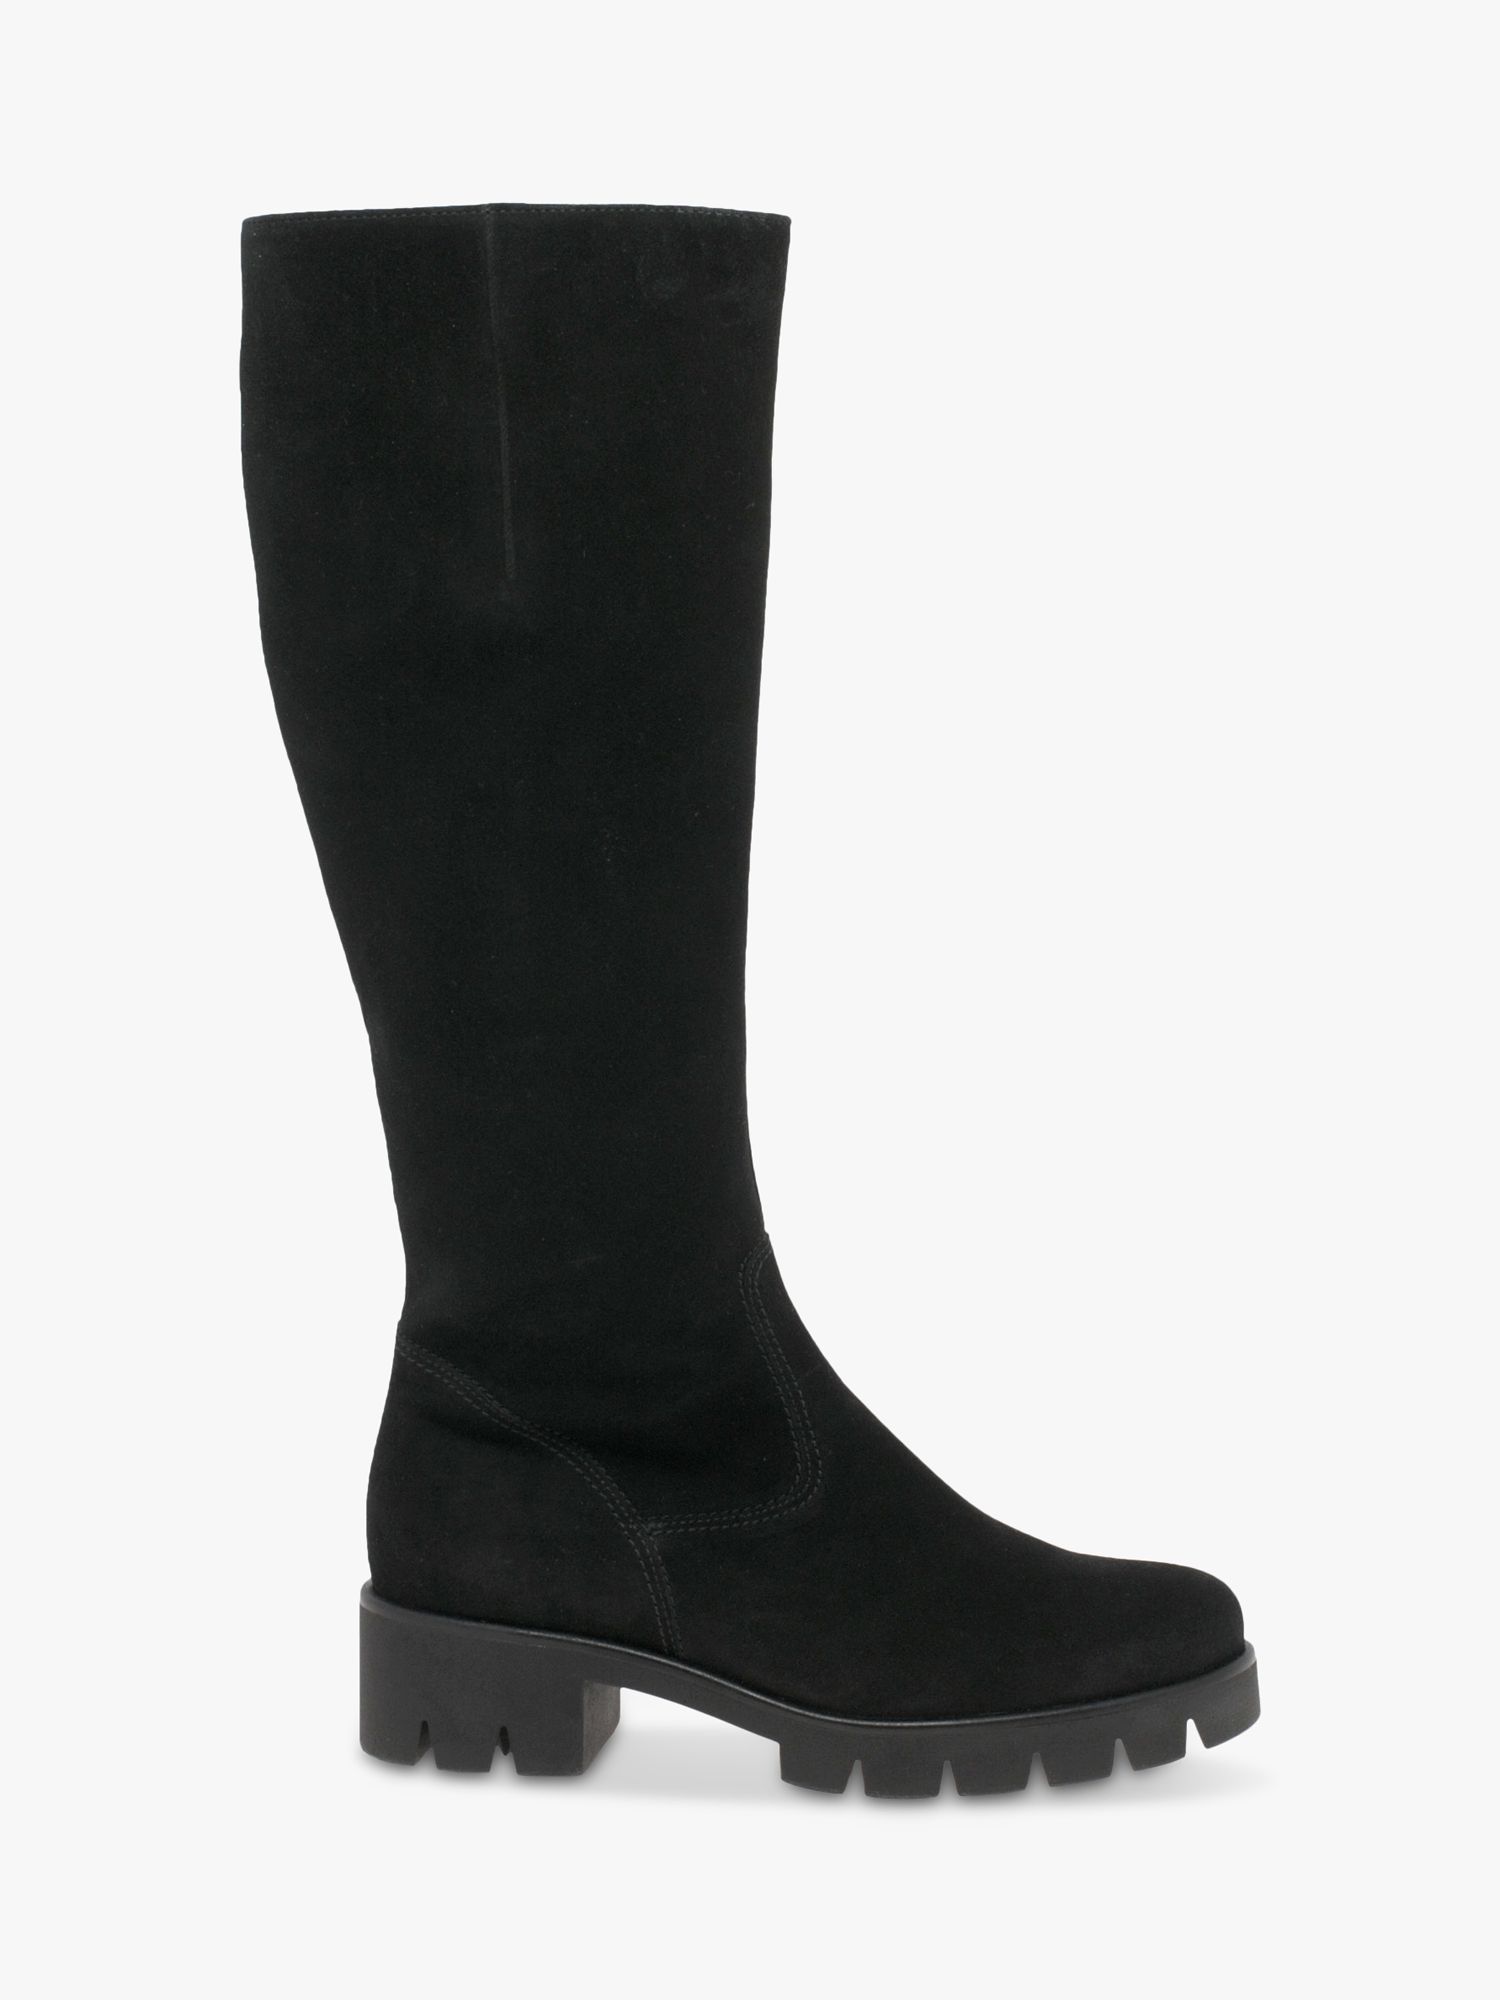 calf length boots for ladies